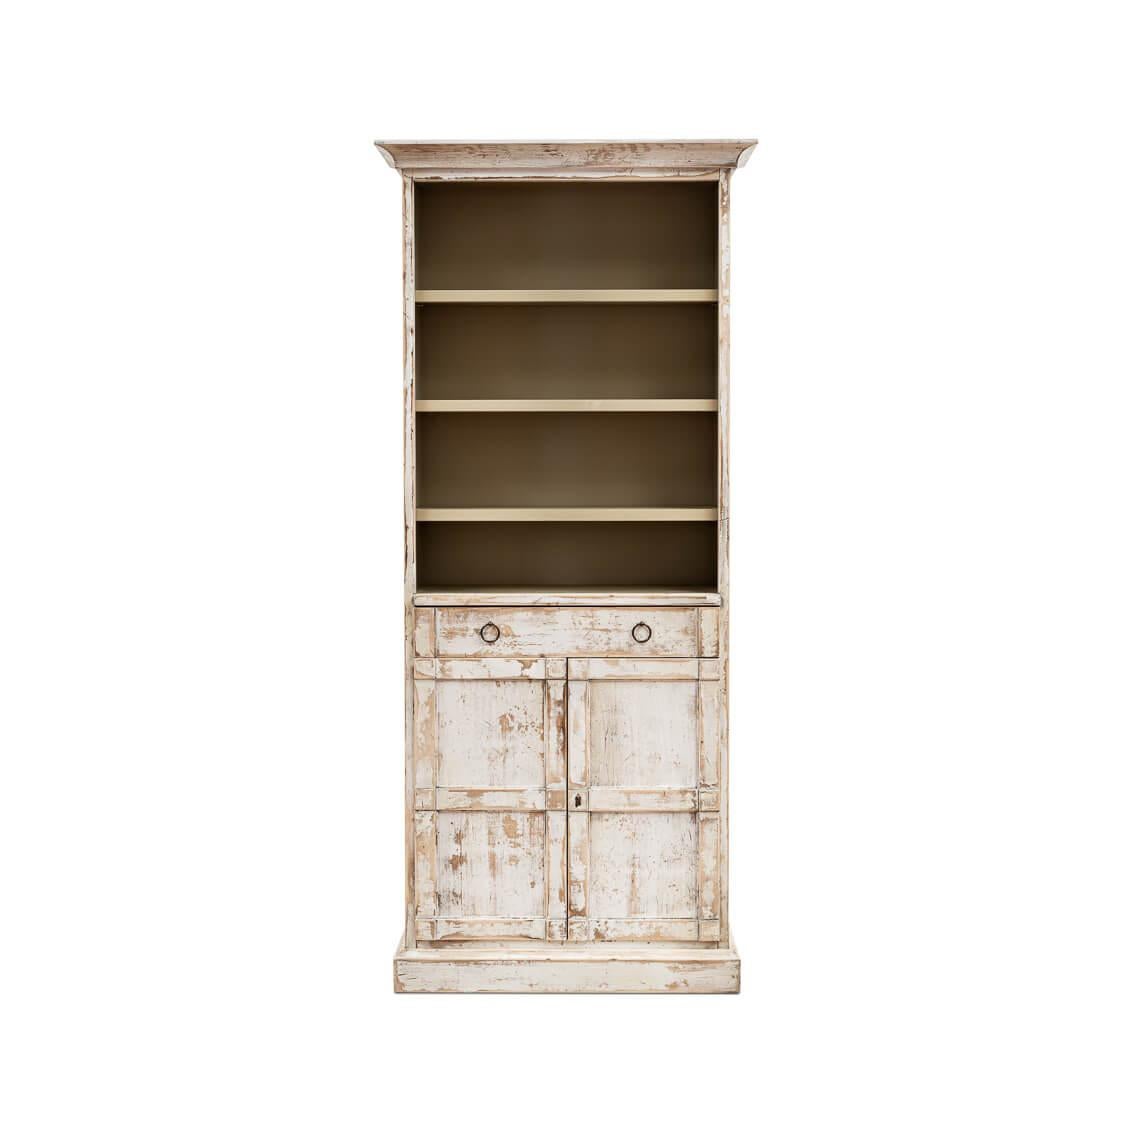 This stately piece stands tall in antiqued and distressed white, offering three open shelves that are perfect for displaying your favorite books, photos, or collectibles. Below, the twin drawers with chic ring pulls provide a safe haven for smaller